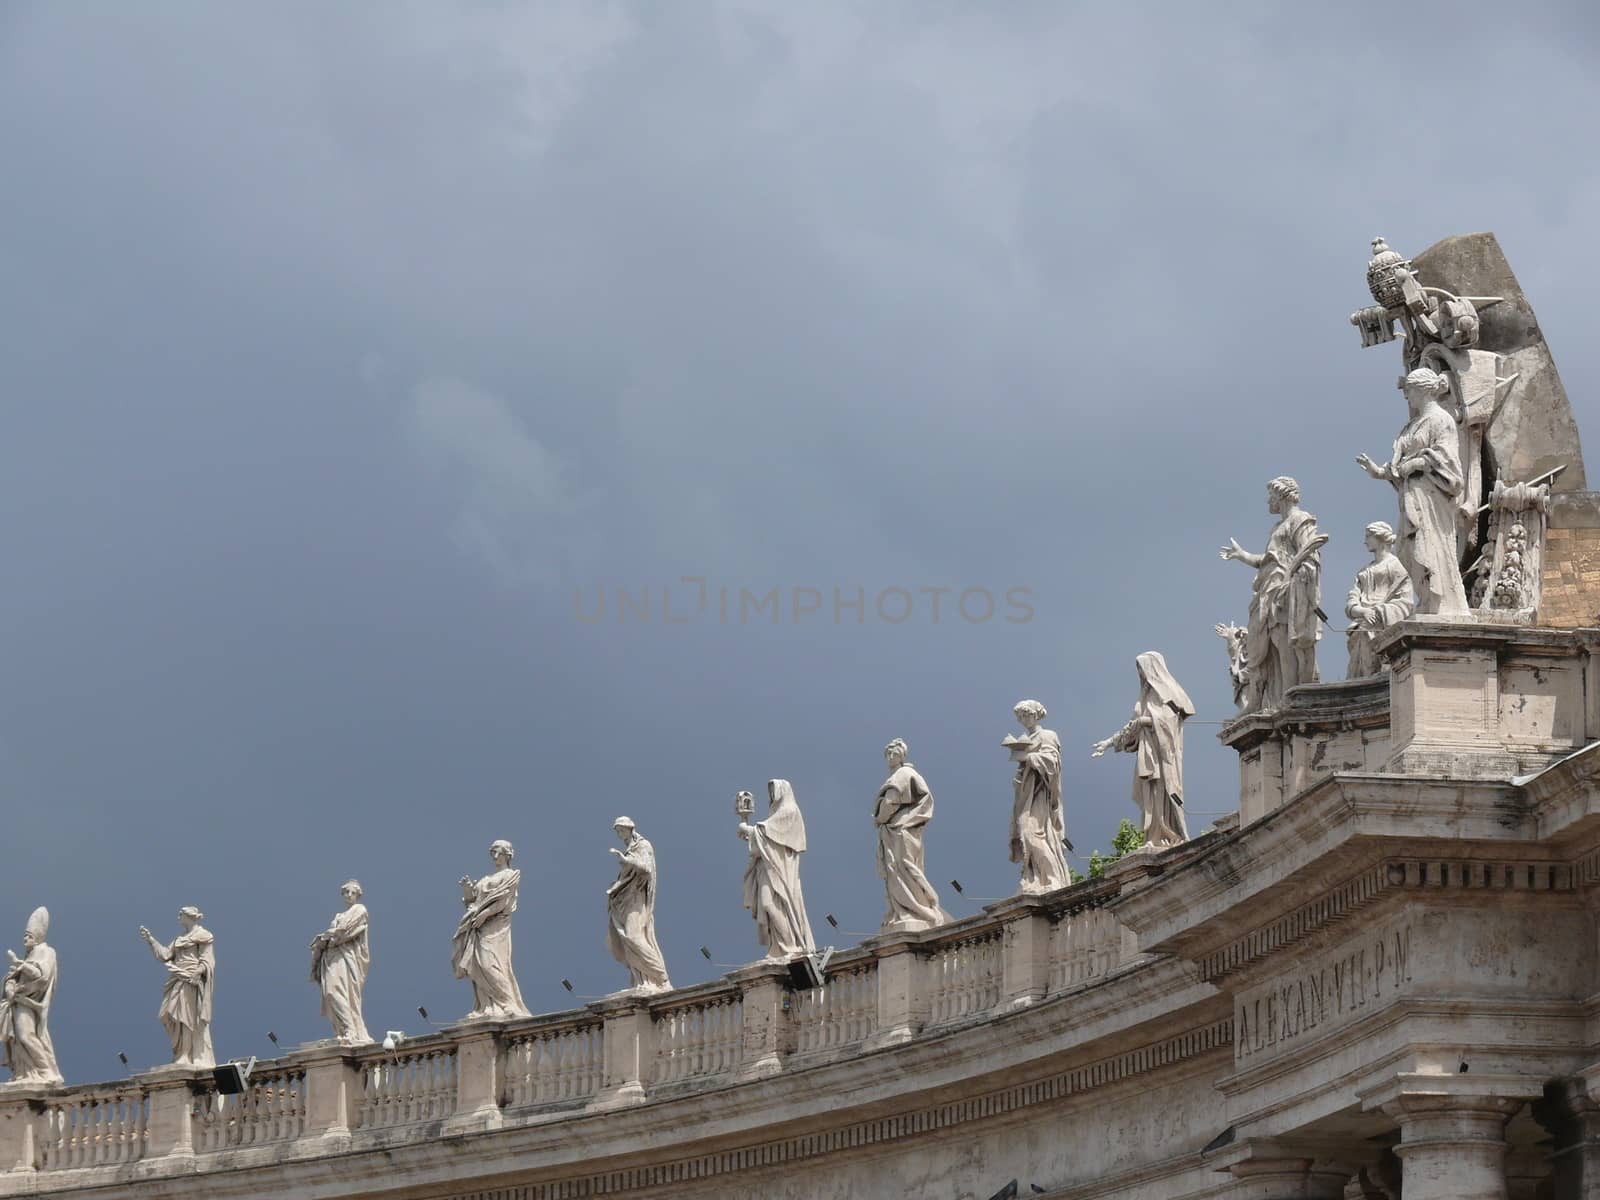 Cloudy sky over the statues of the colonnade of St. Peter's Square in the Vatican.